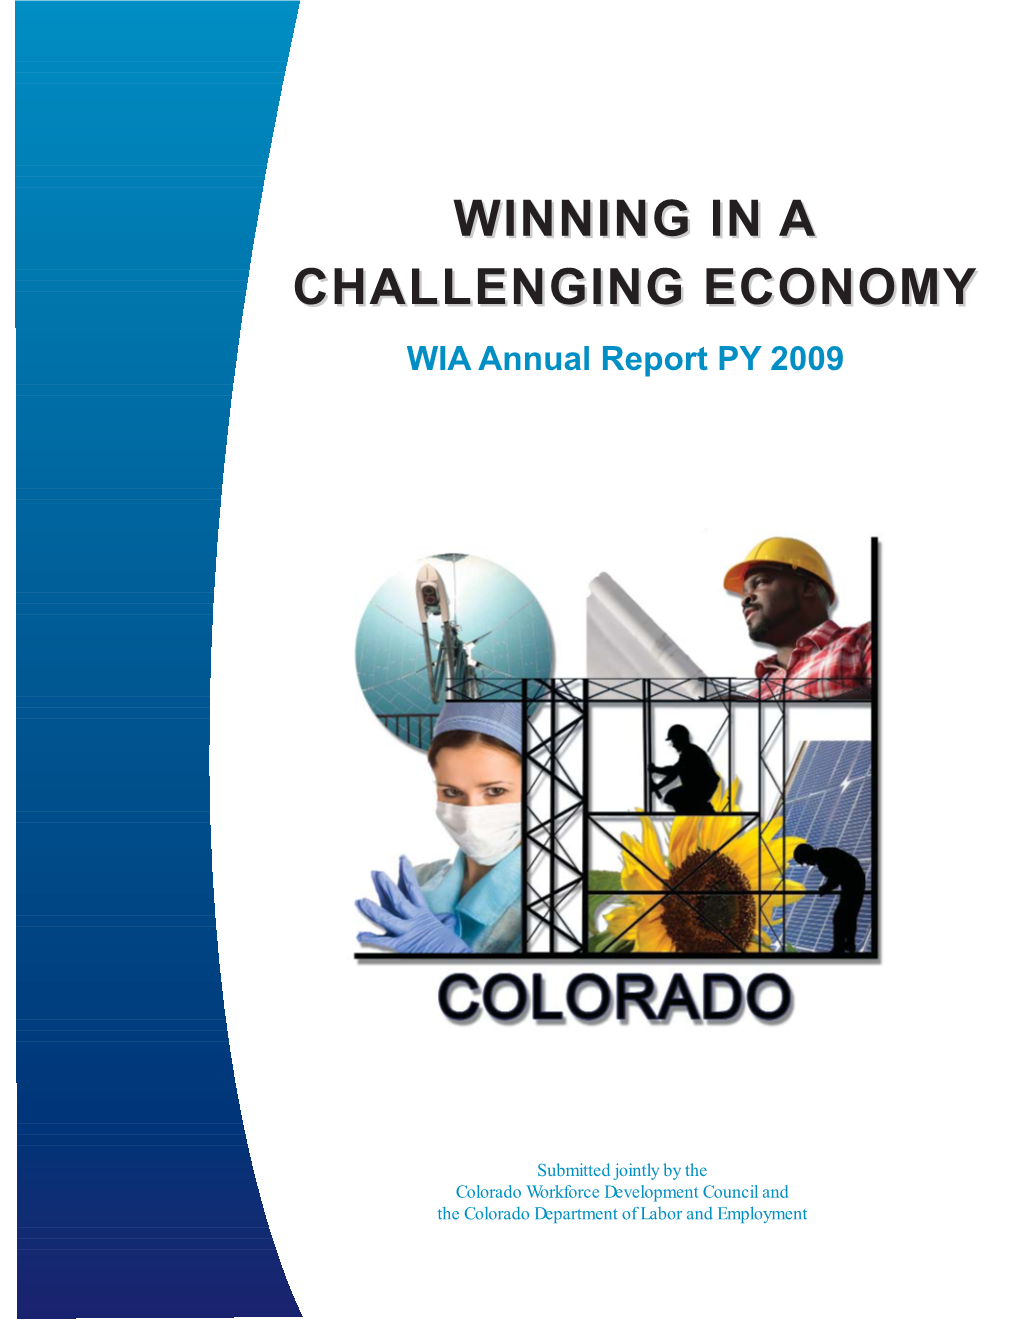 Winning in a Challenging Economy, Colorado's 10Th Annual Report on the State of the Workforce Investment Act (WIA)